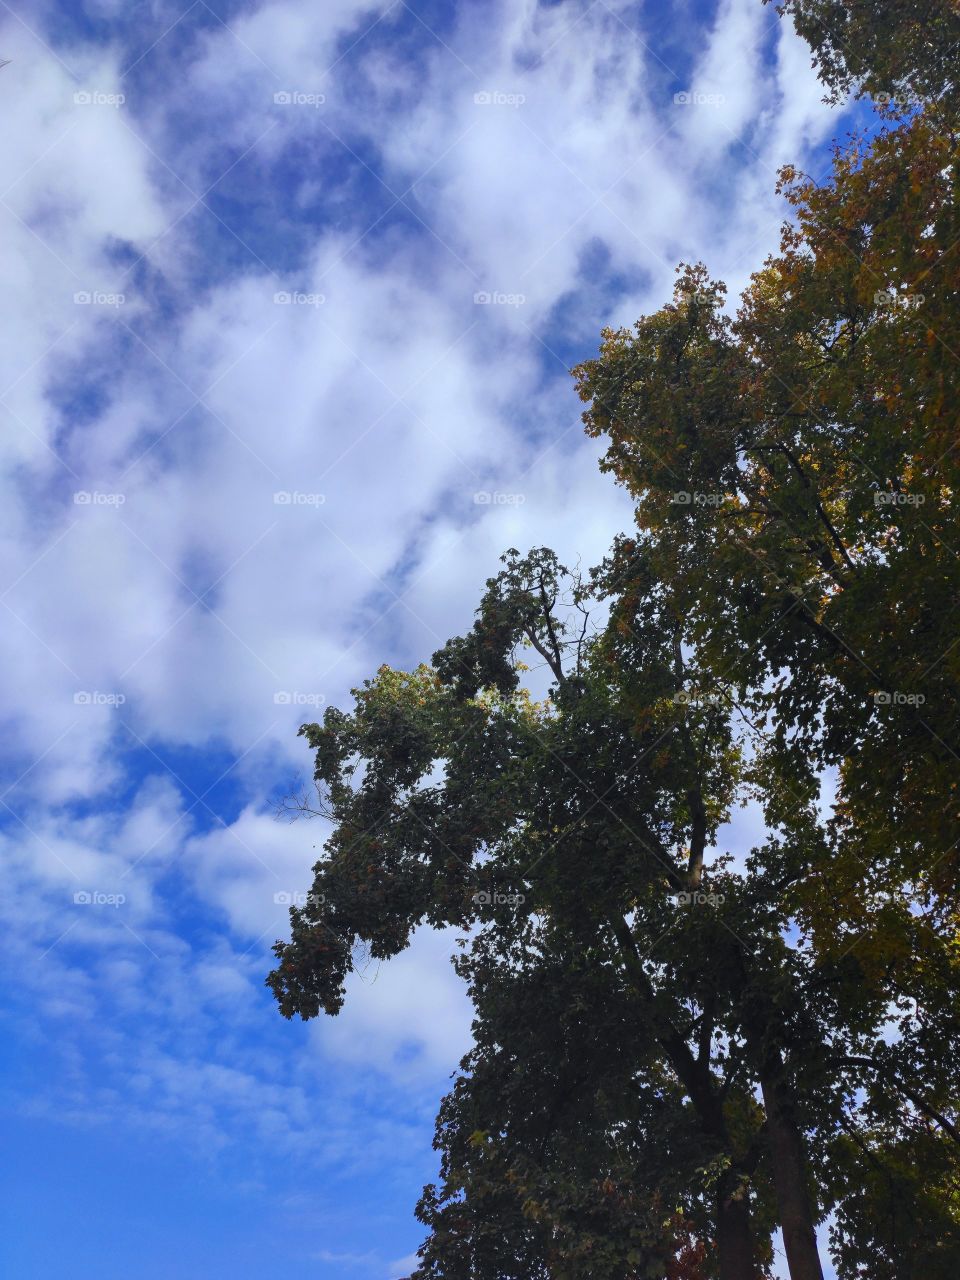 Trees with leaves against the sky and a blur